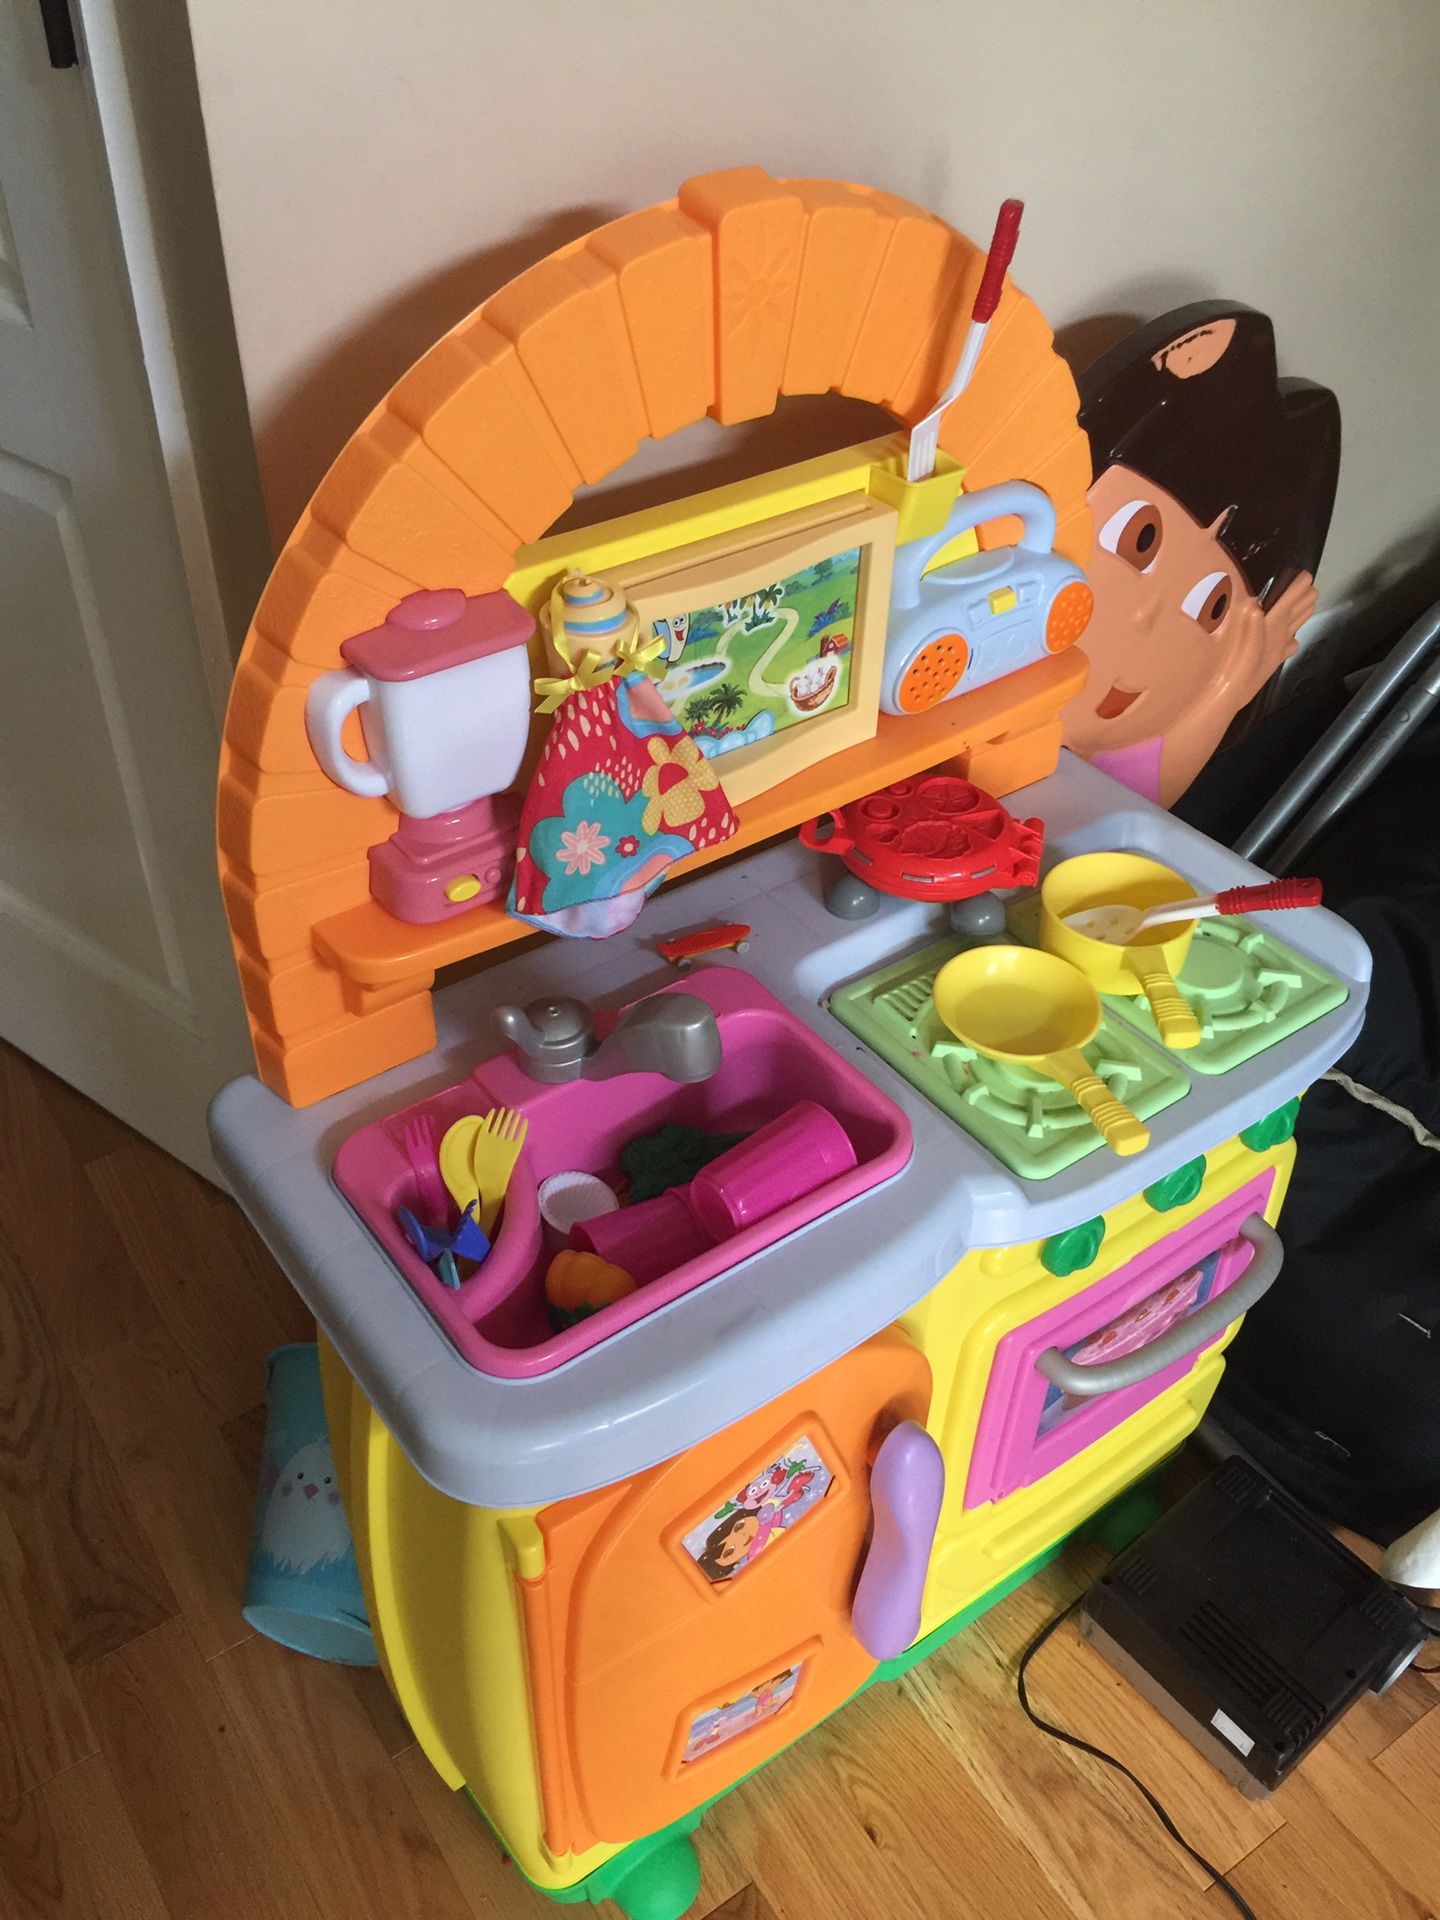 Dora toddler kitchen. Comes with tons of utensils